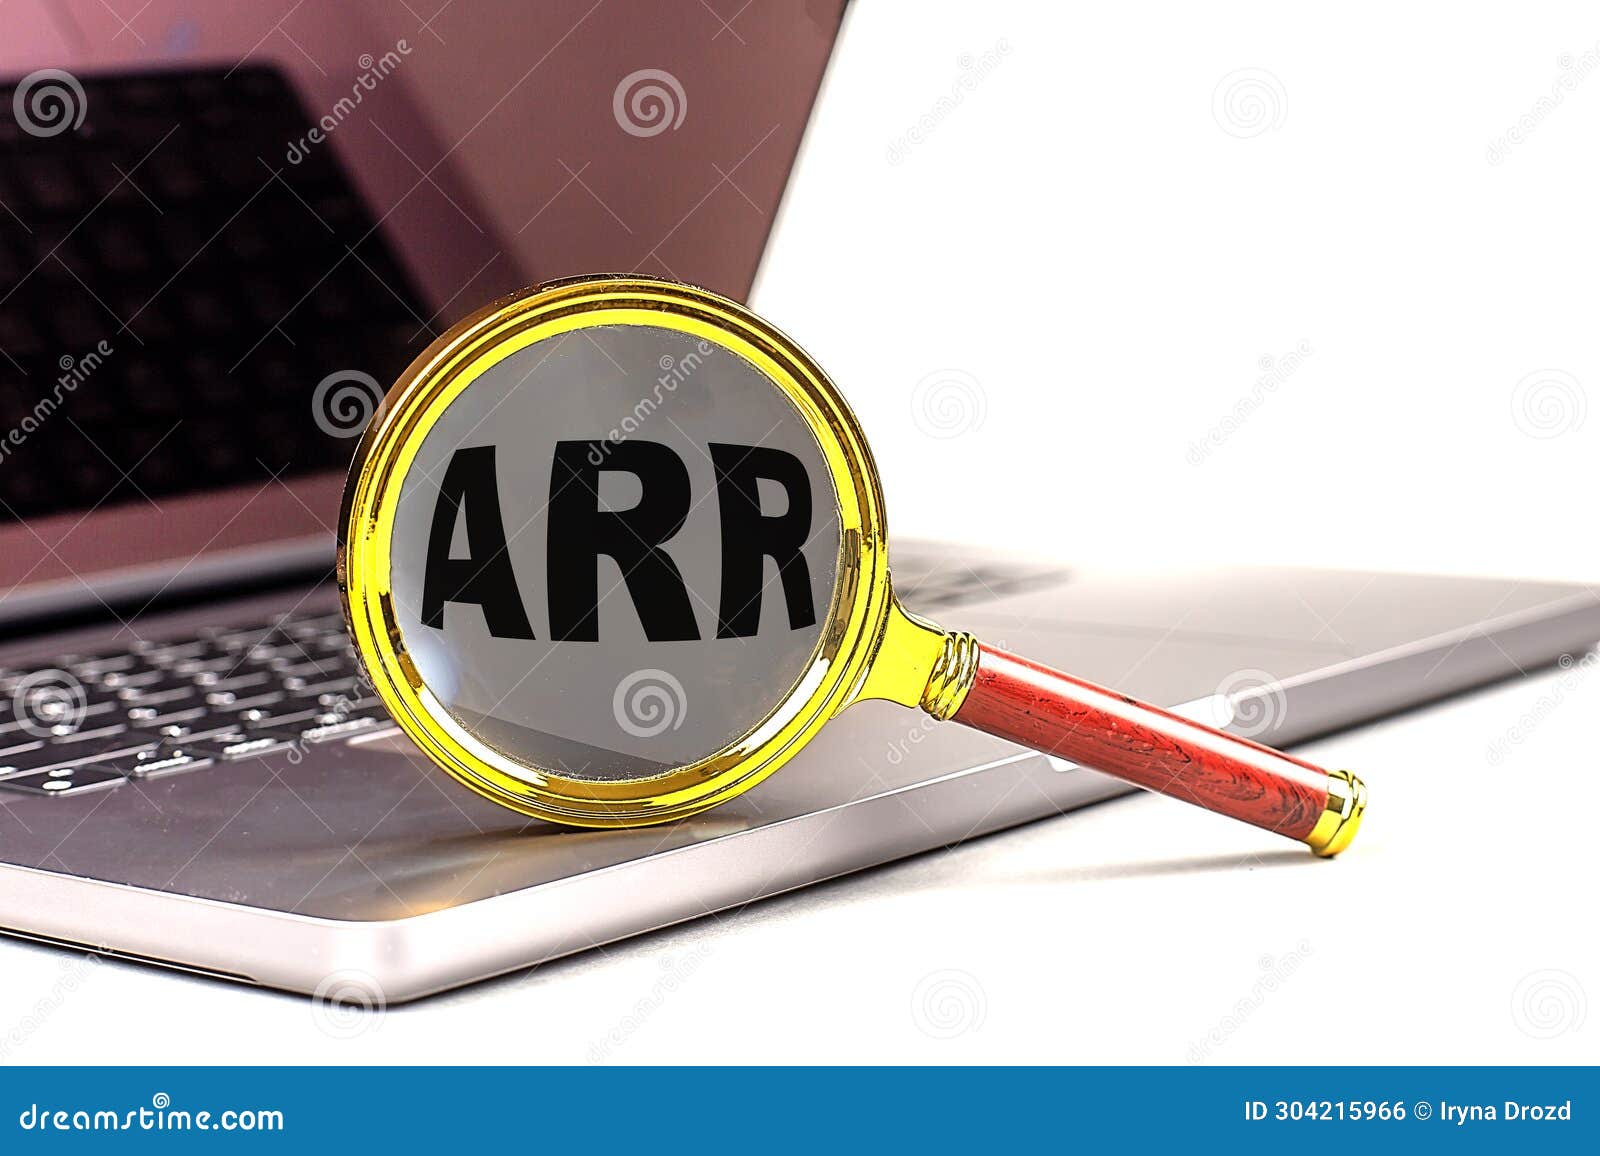 word arr on magnifier on laptop , business concept